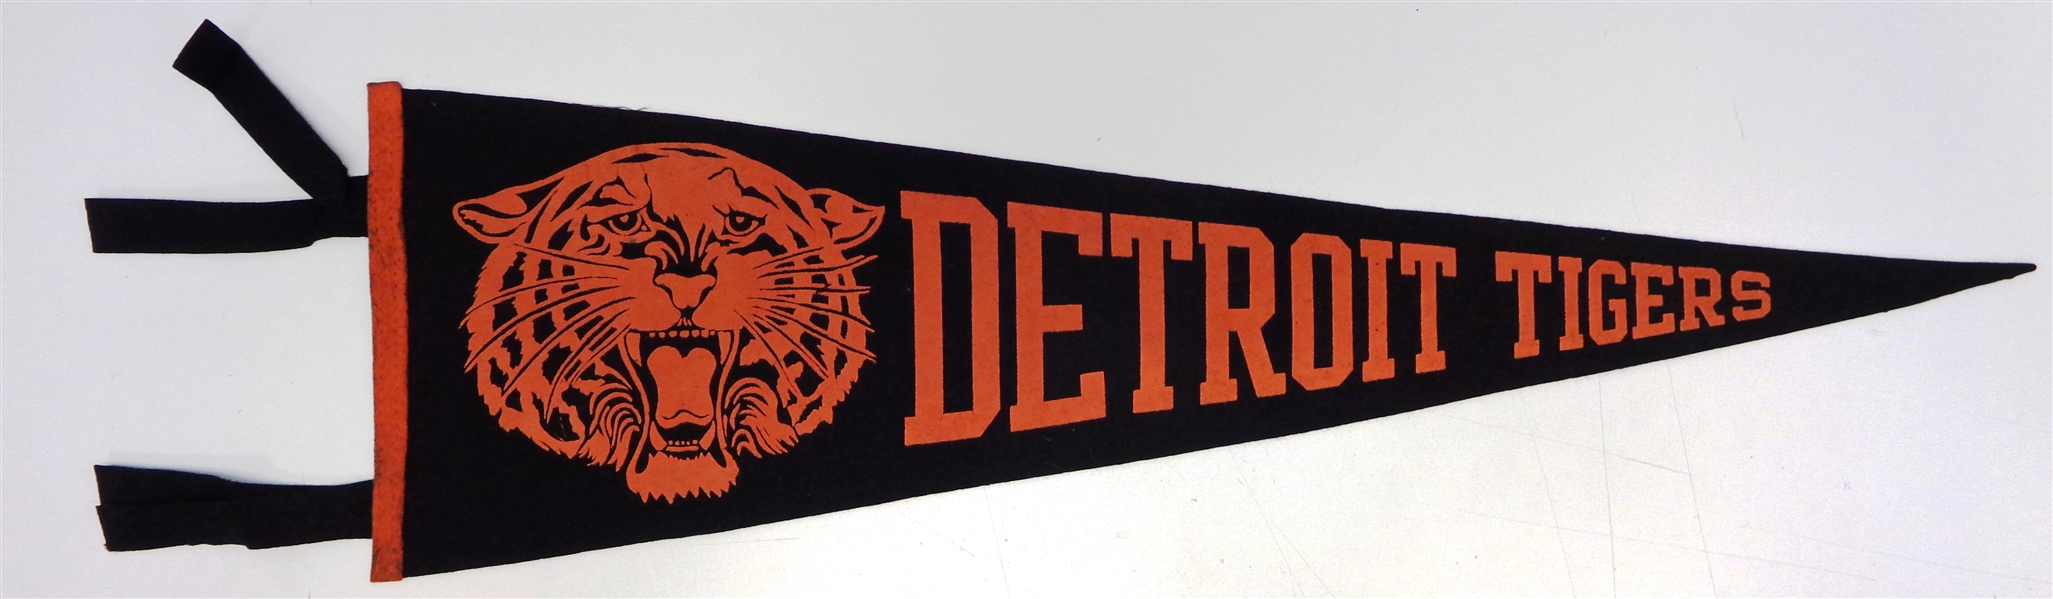 Detroit Tigers 1940s 3/4 Size Pennant